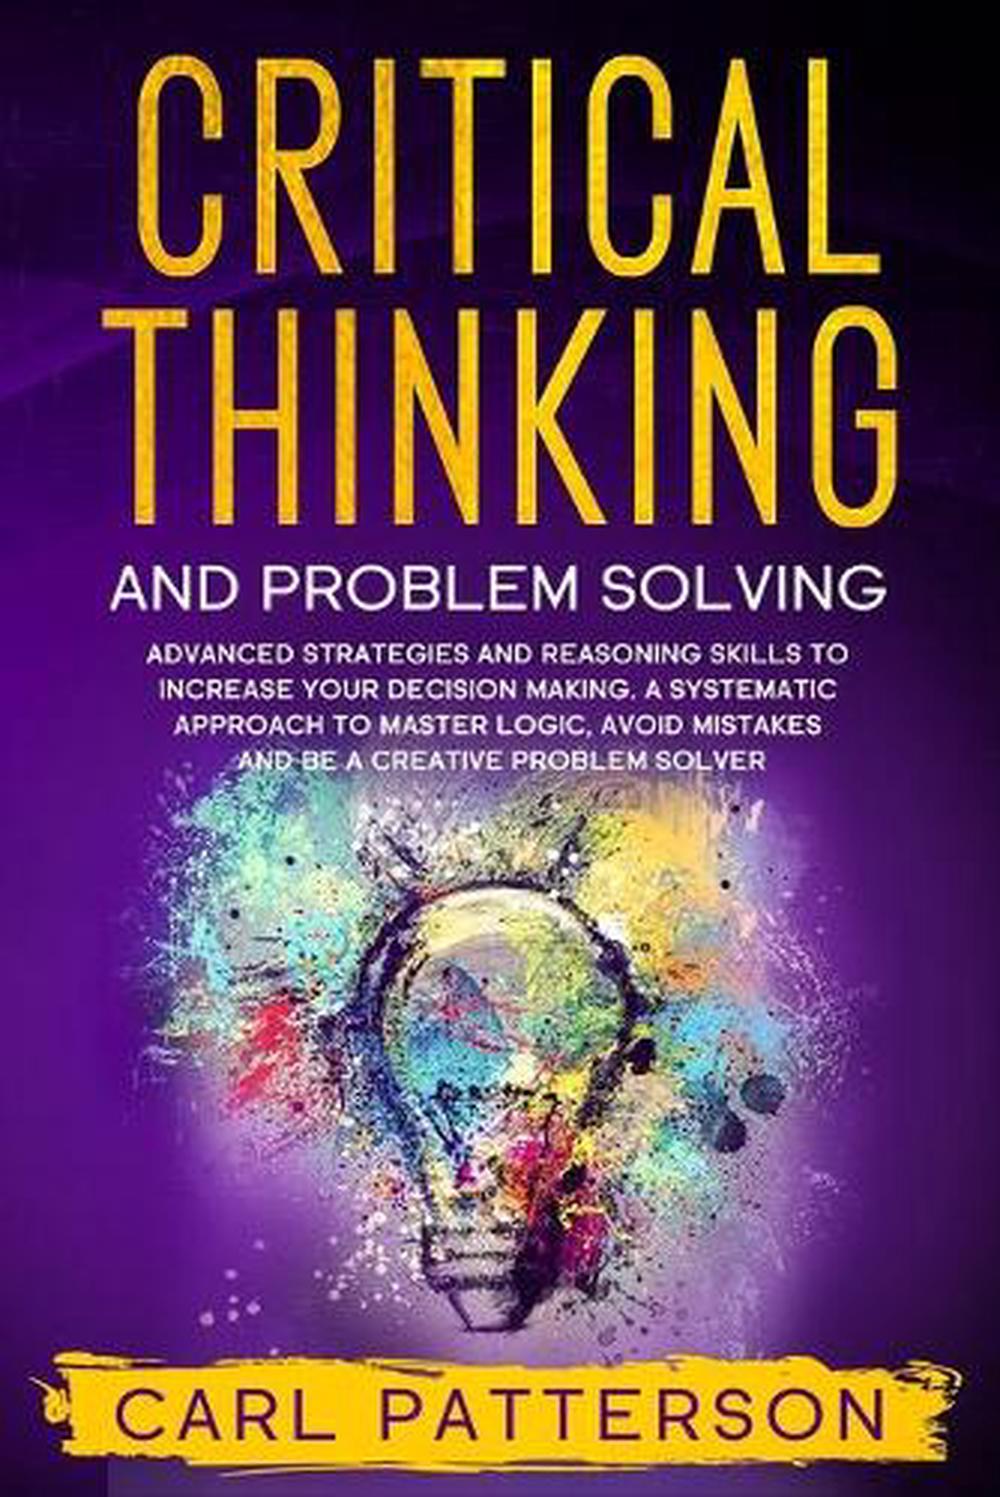 21st century skills critical thinking and problem solving book